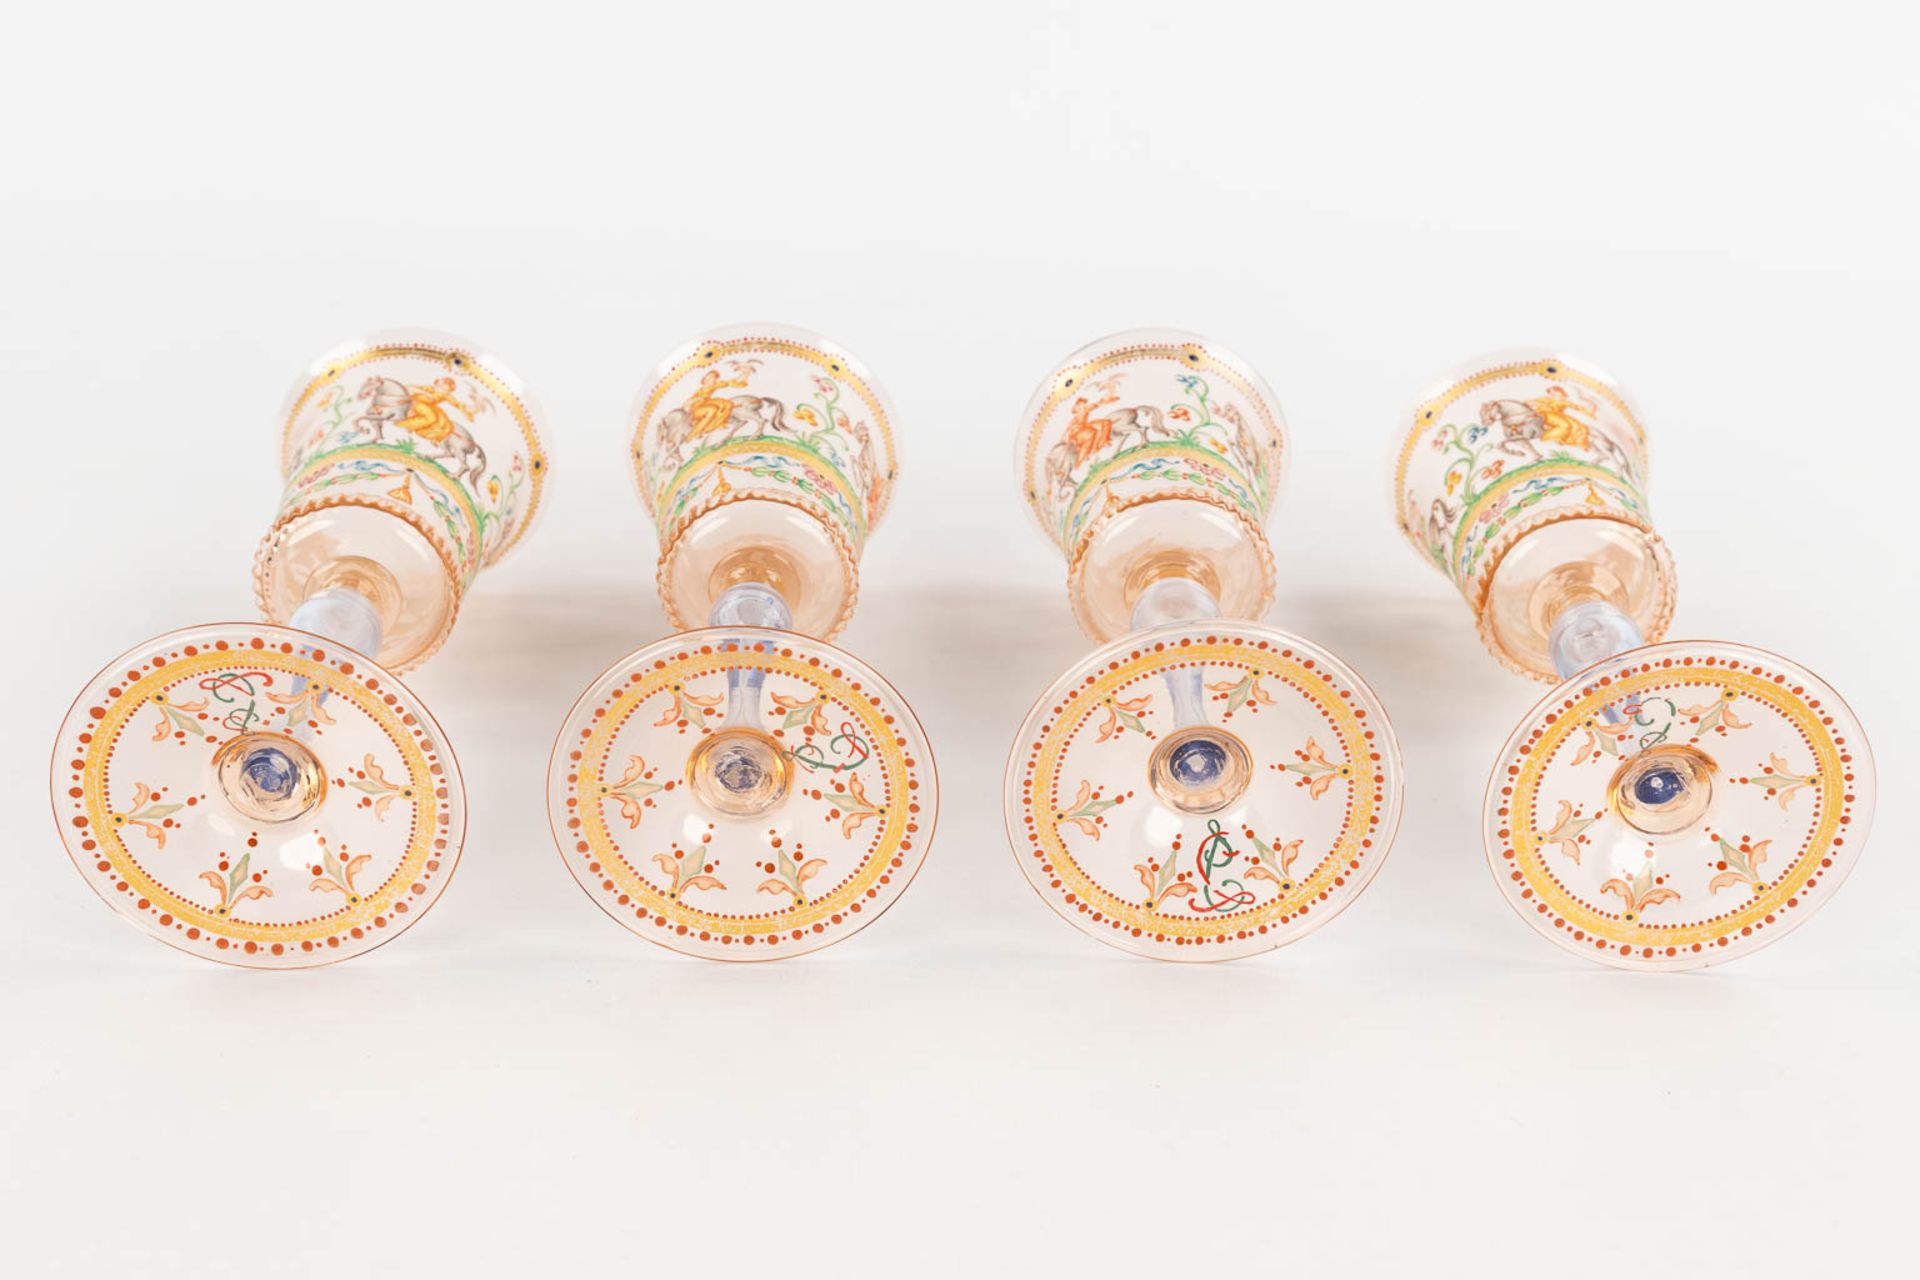 A set of 4 hand-painted and antique goblets, Murano, Salviati, 19th C. (H:17 x D:7 cm) - Image 8 of 16